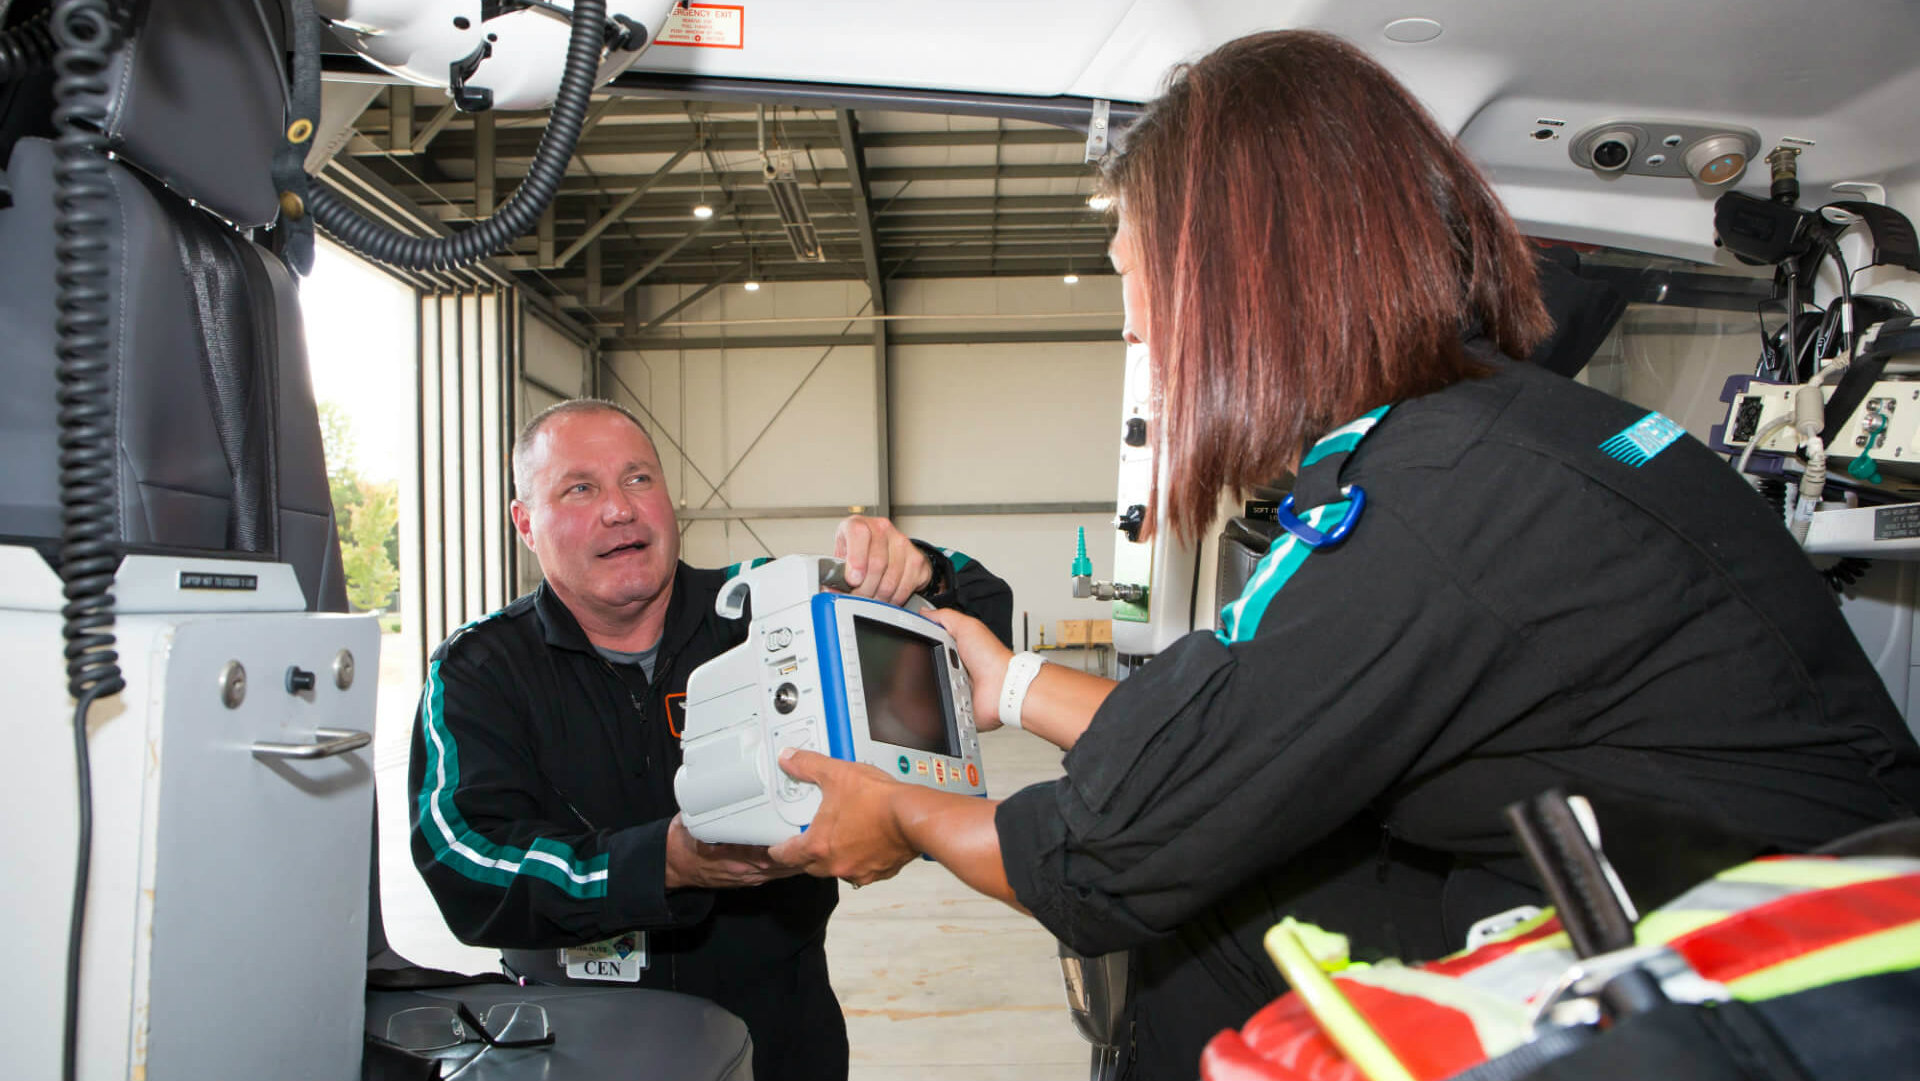 Brian Huss, RN, hands a medical monitor to Erica Cook, RN, as the members of Atrium Health's MedCenter Air team prepare a helicopter for deployment ahead of Hurricane Florence. 